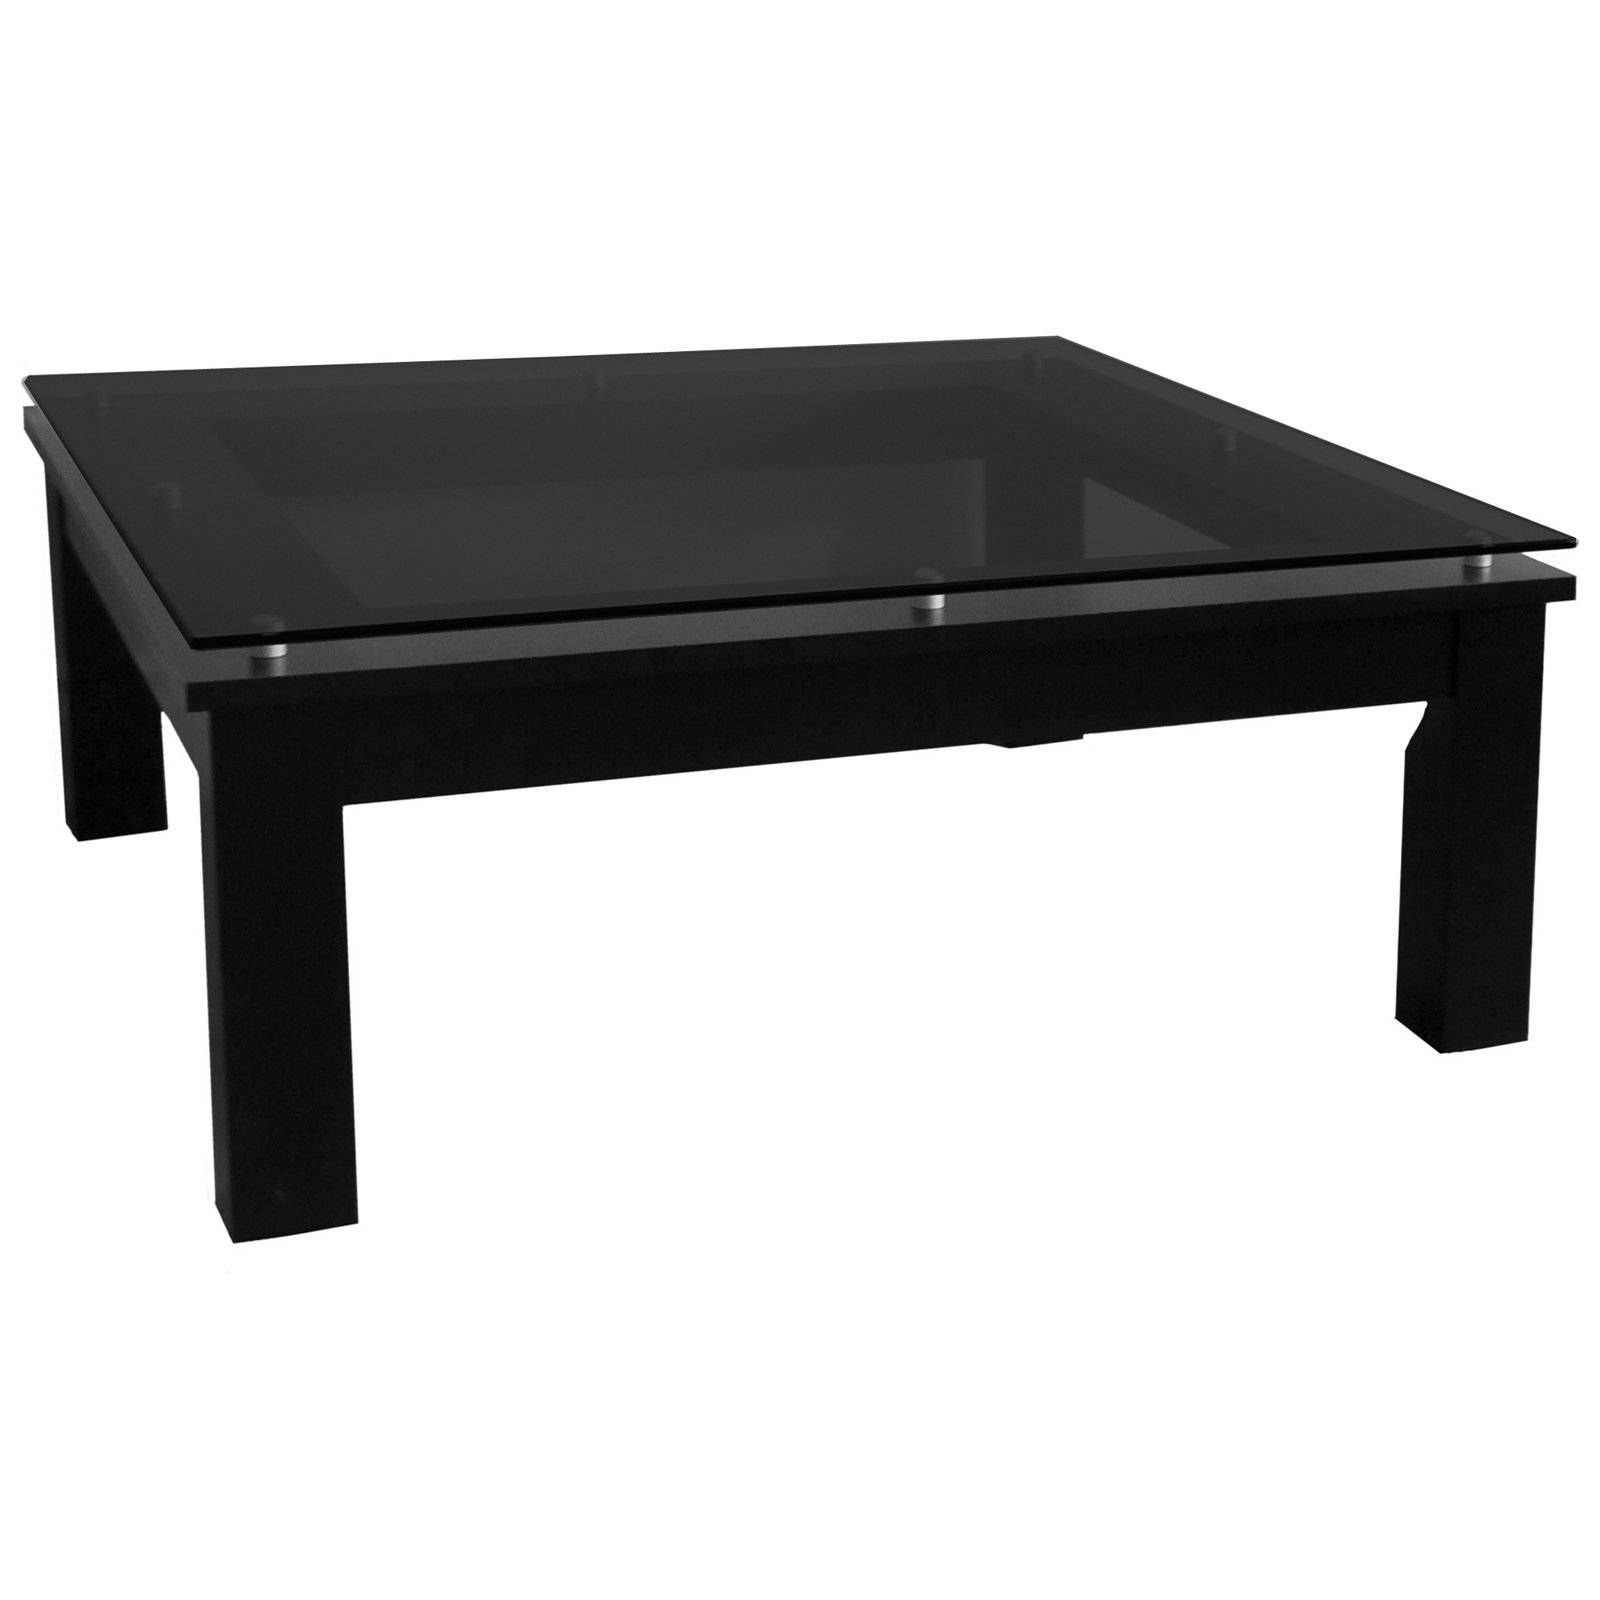 Stylish Extra Large Black Square Coffee Table For Living Room With Intended For Square Dark Wood Coffee Table (View 9 of 30)